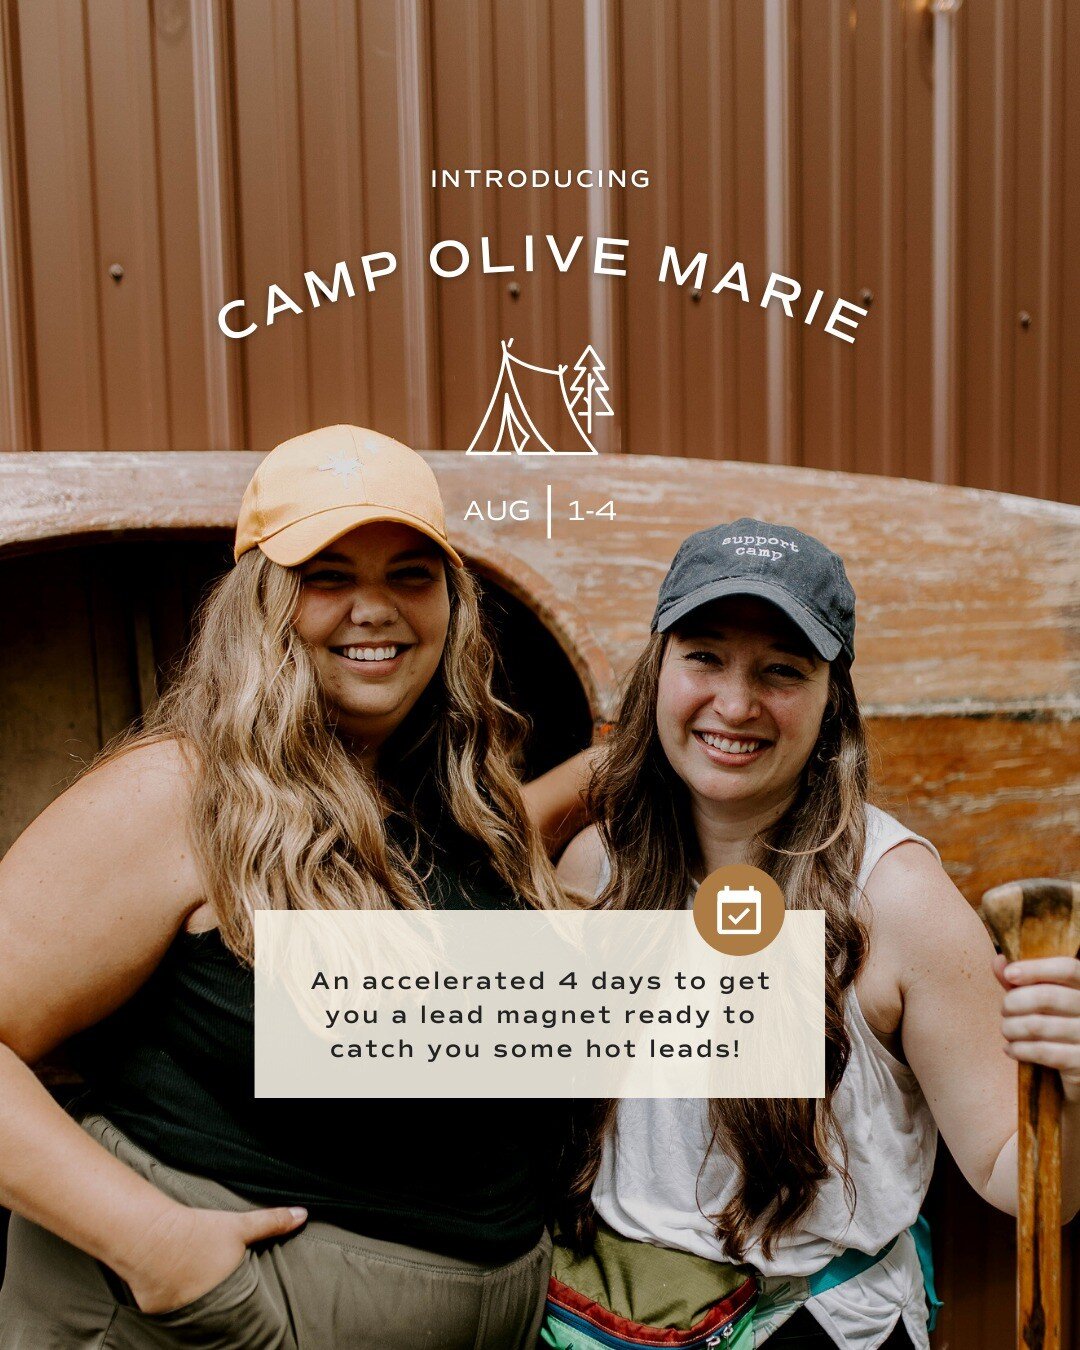 Are you signed up for Camp Olive Marie yet?

Next week we will tackle one of our most frequently asked topics:  Lead Magnets.

Together we'll talk through - picking the right topic, how to best design, how to set up for automation, and how to follow 